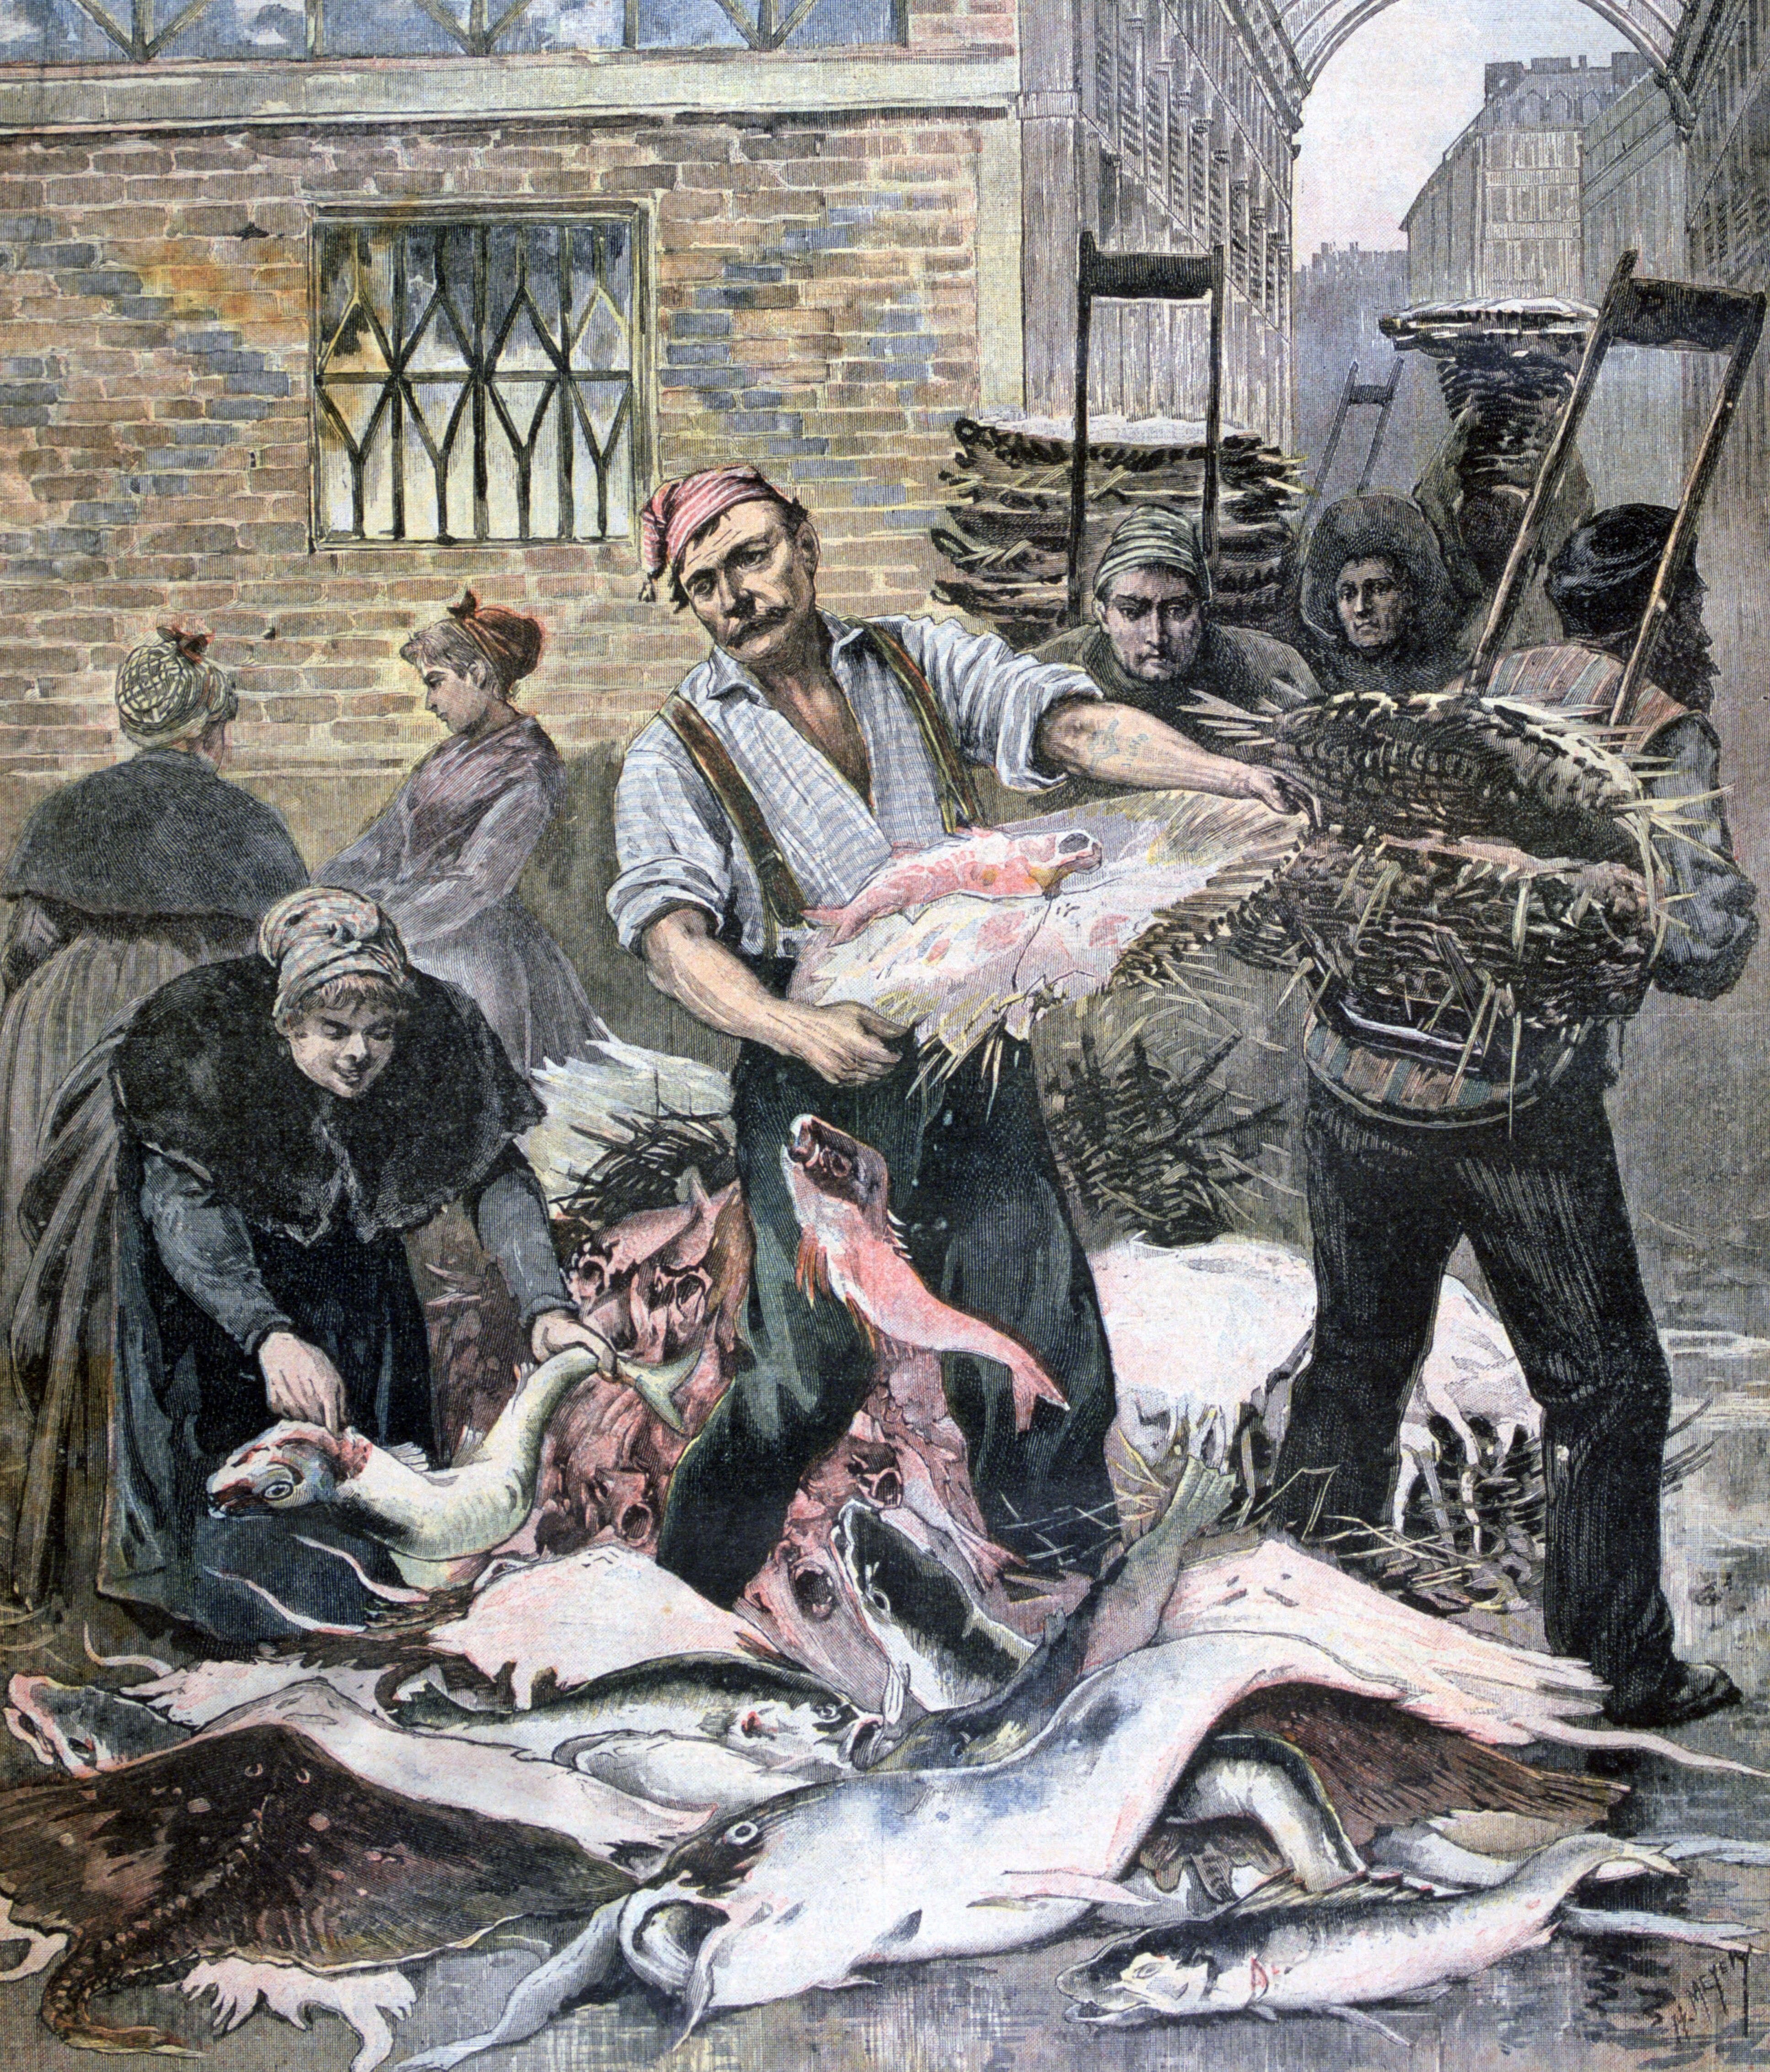 The depiction of Lent from 1893 shows how long fish has been a major part of the Christian tradition.